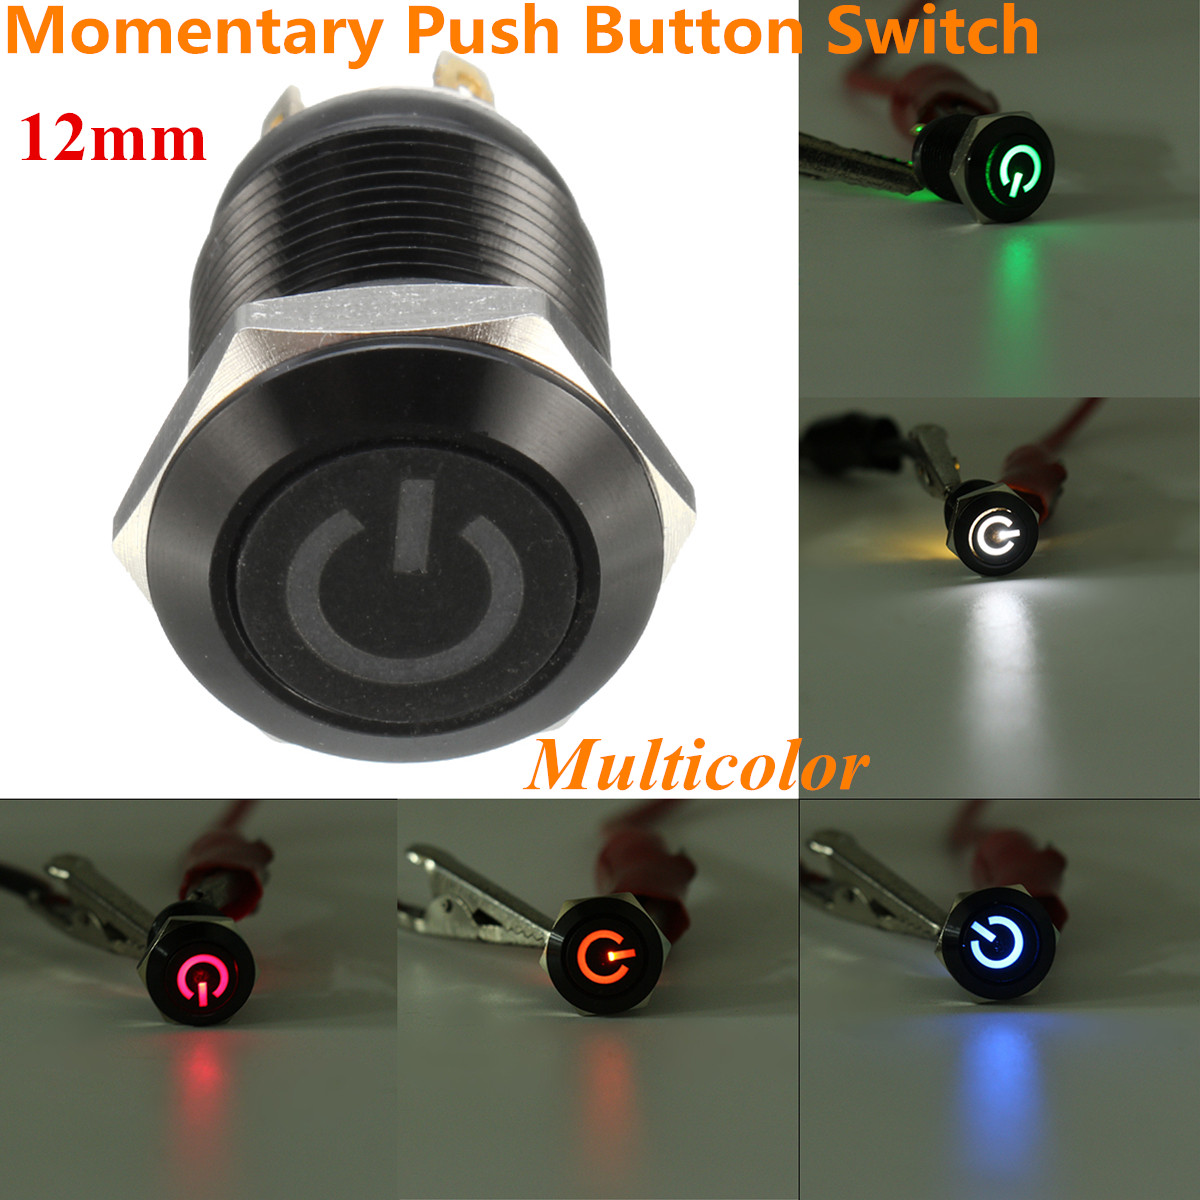 4 pin momentary switch